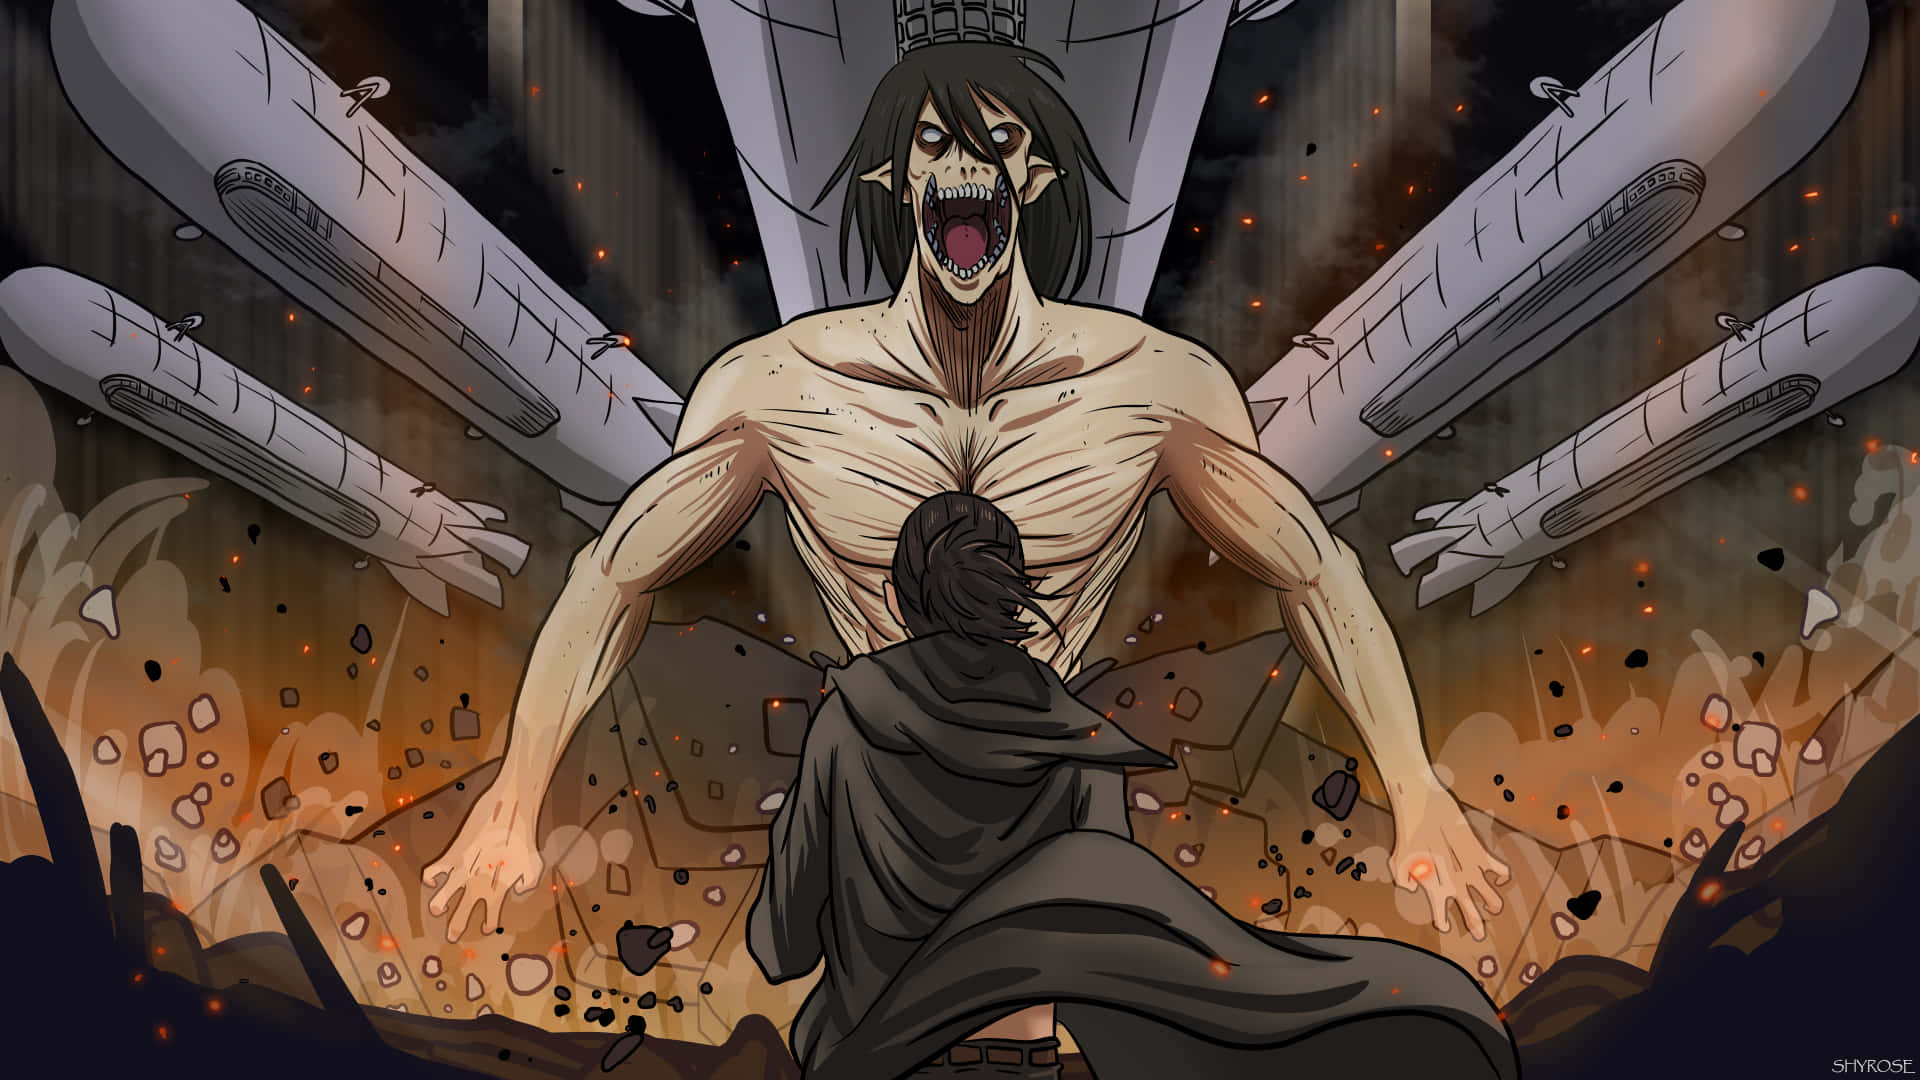 Eren Yeager battles giant Titans to protect the walls of his home Wallpaper